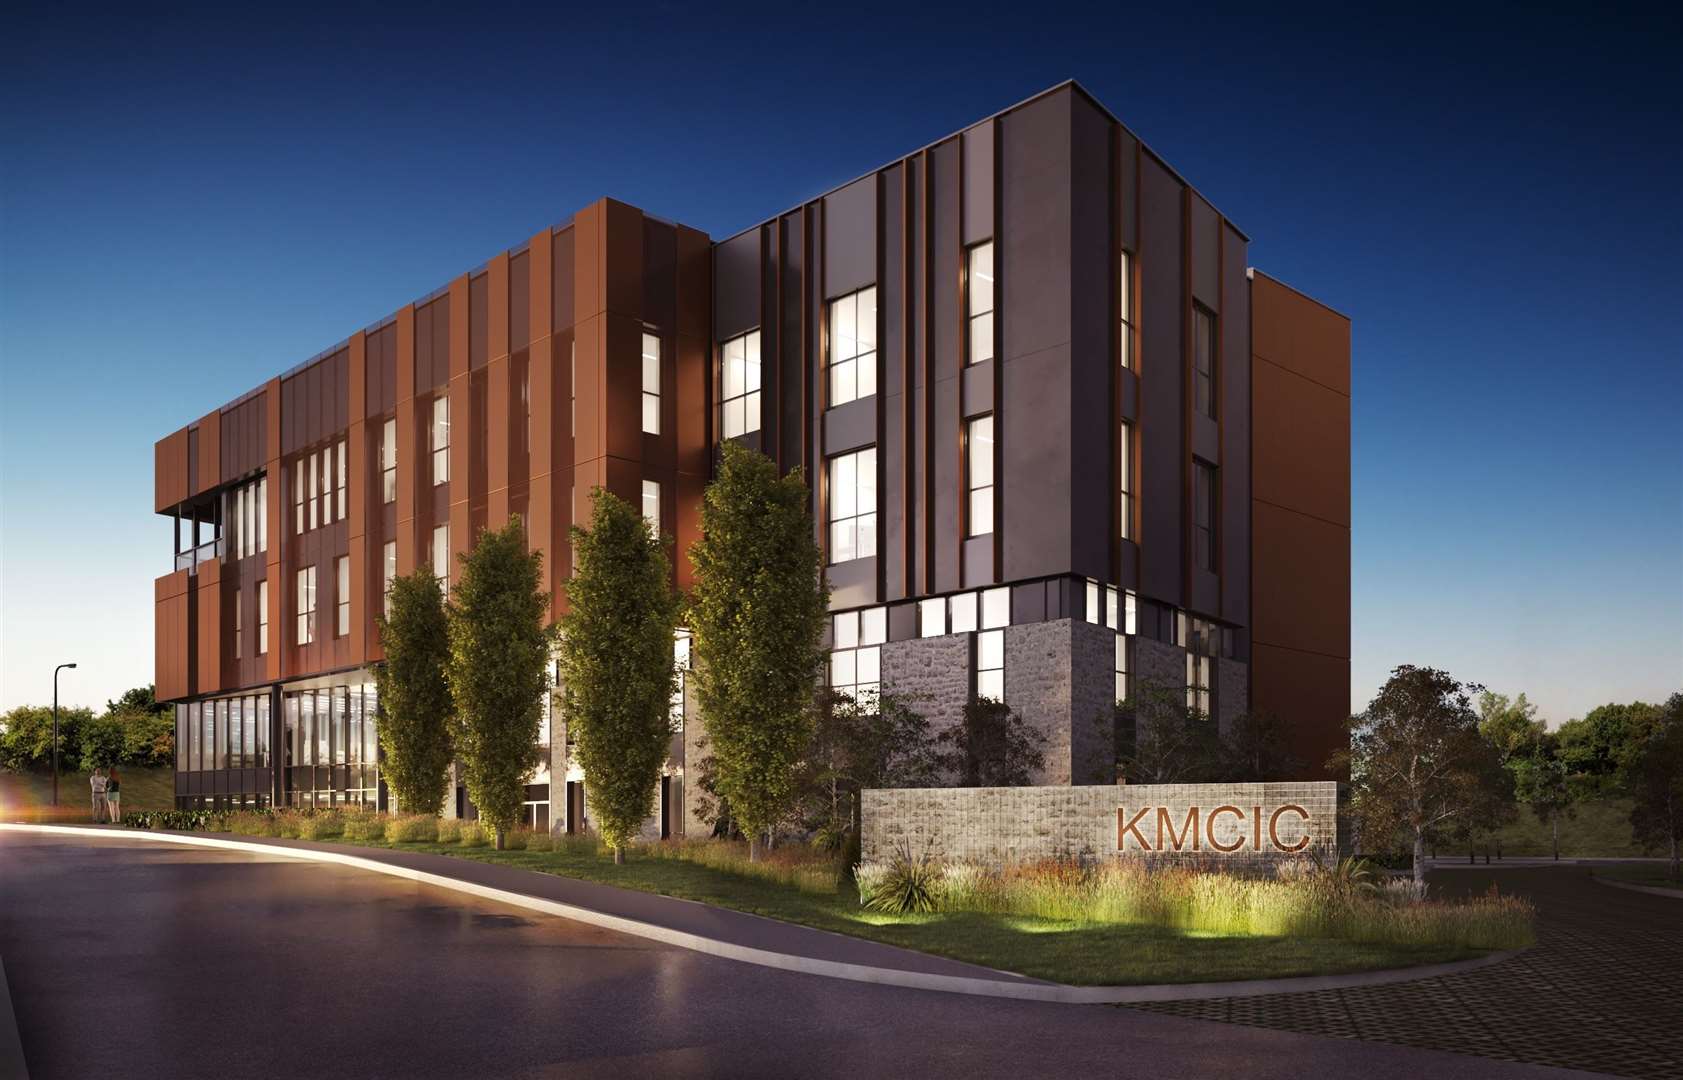 An artist's impression of the proposed Innovation Centre at Kent Medical Campus